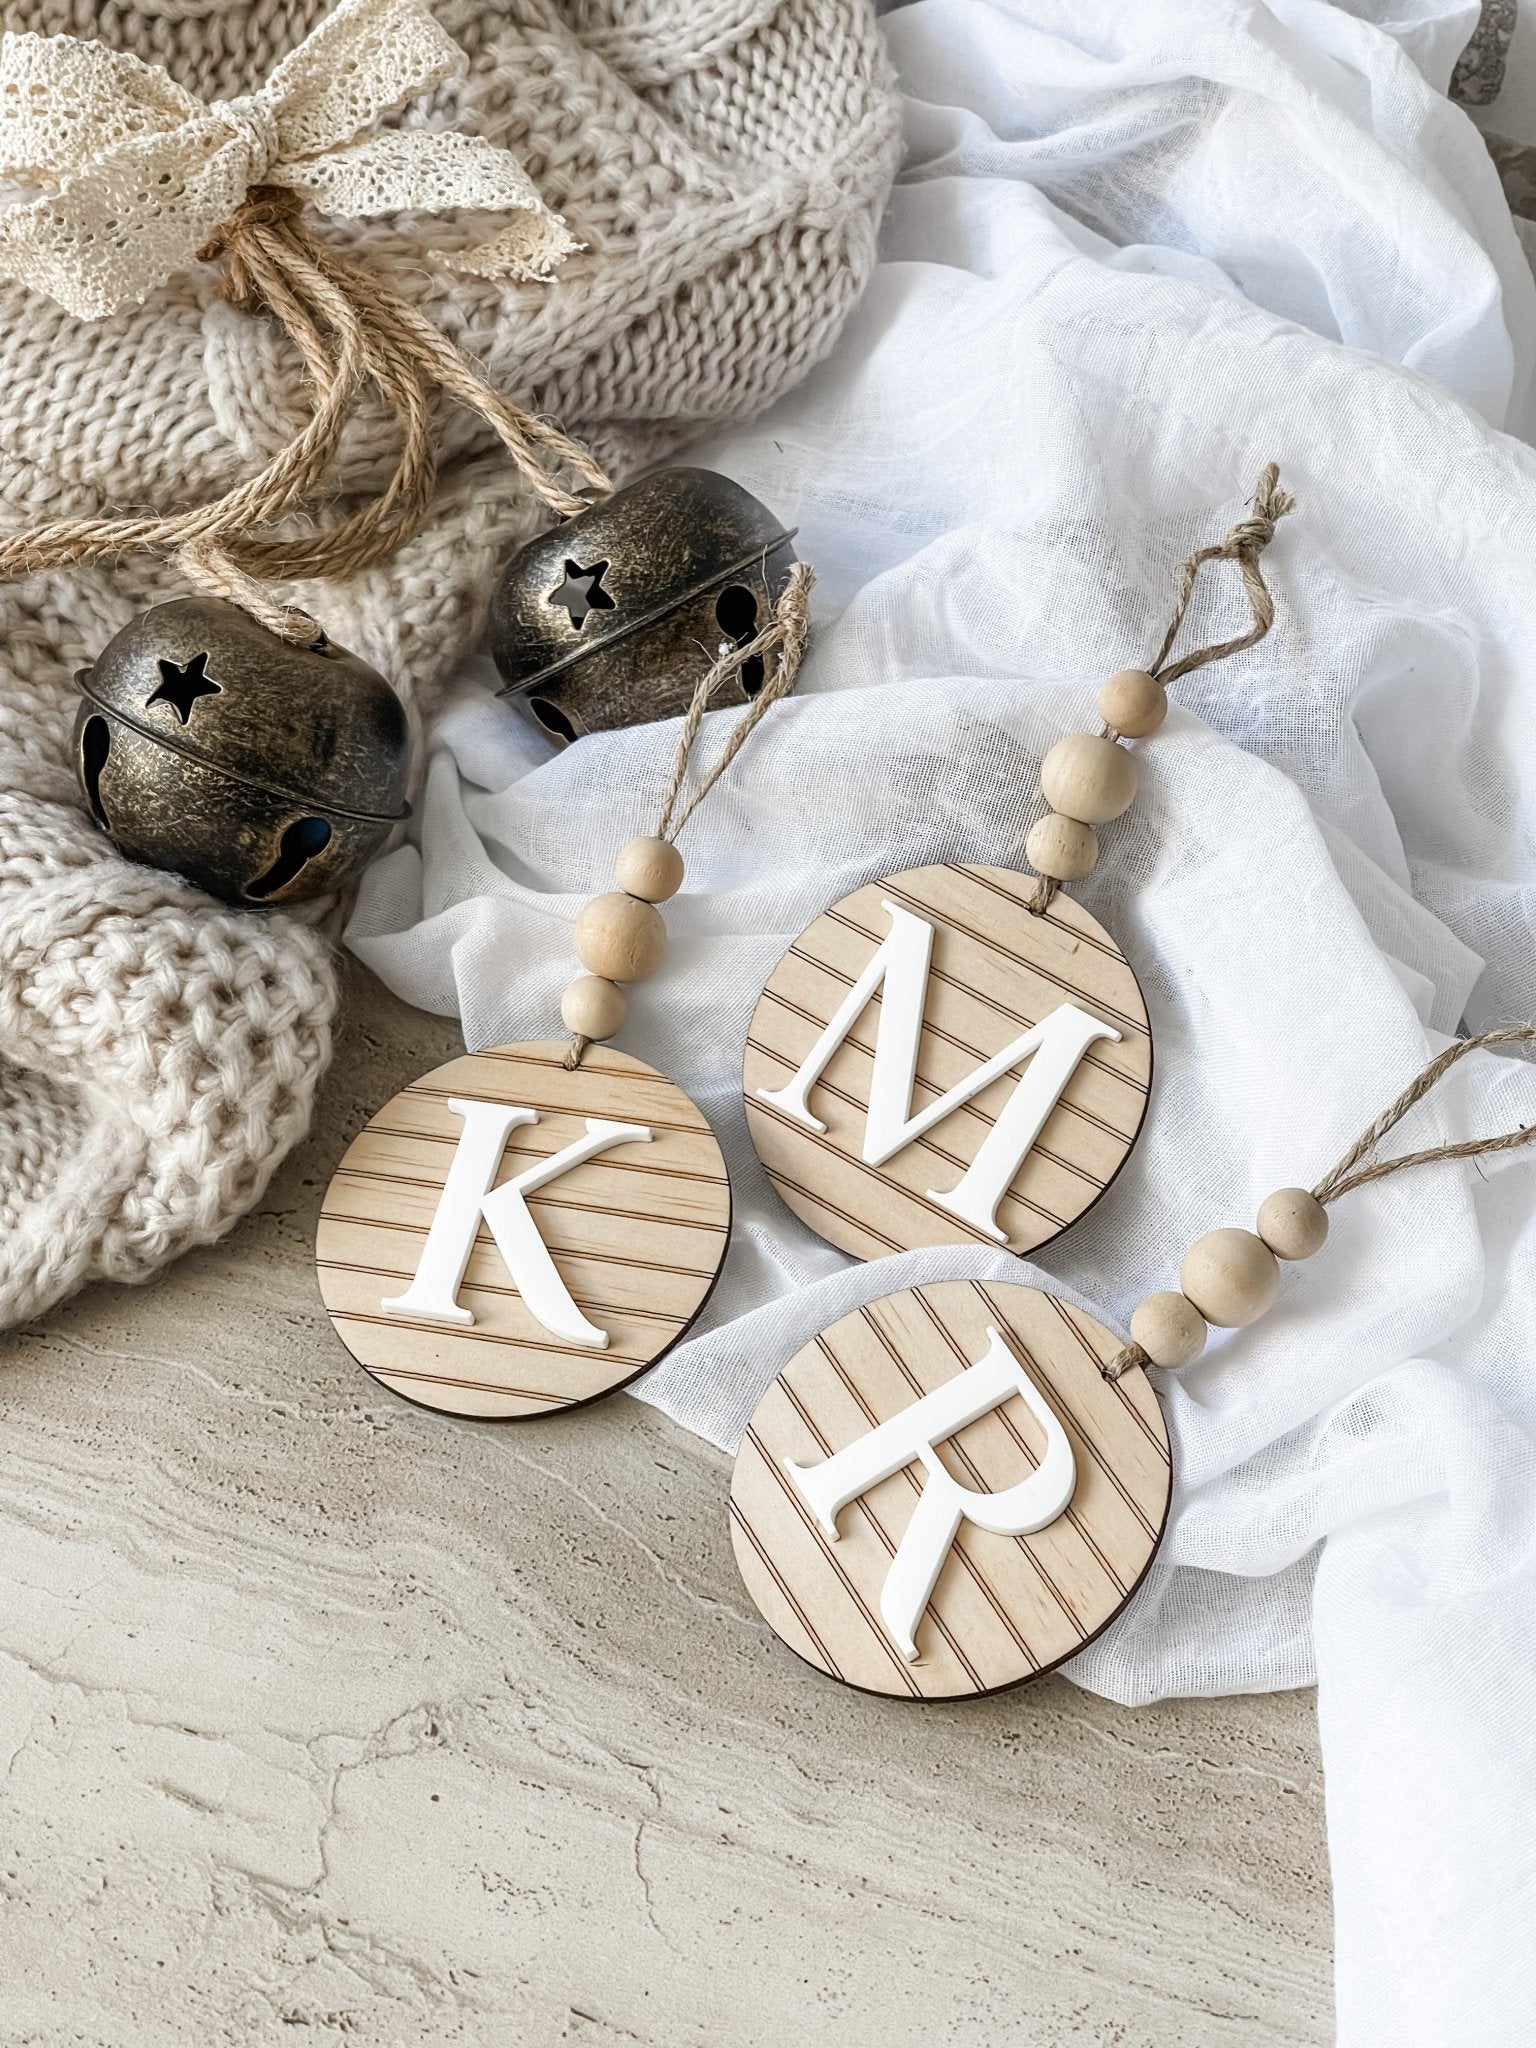 Farmhouse Style Letter Ornament - The Humble Gift Co.